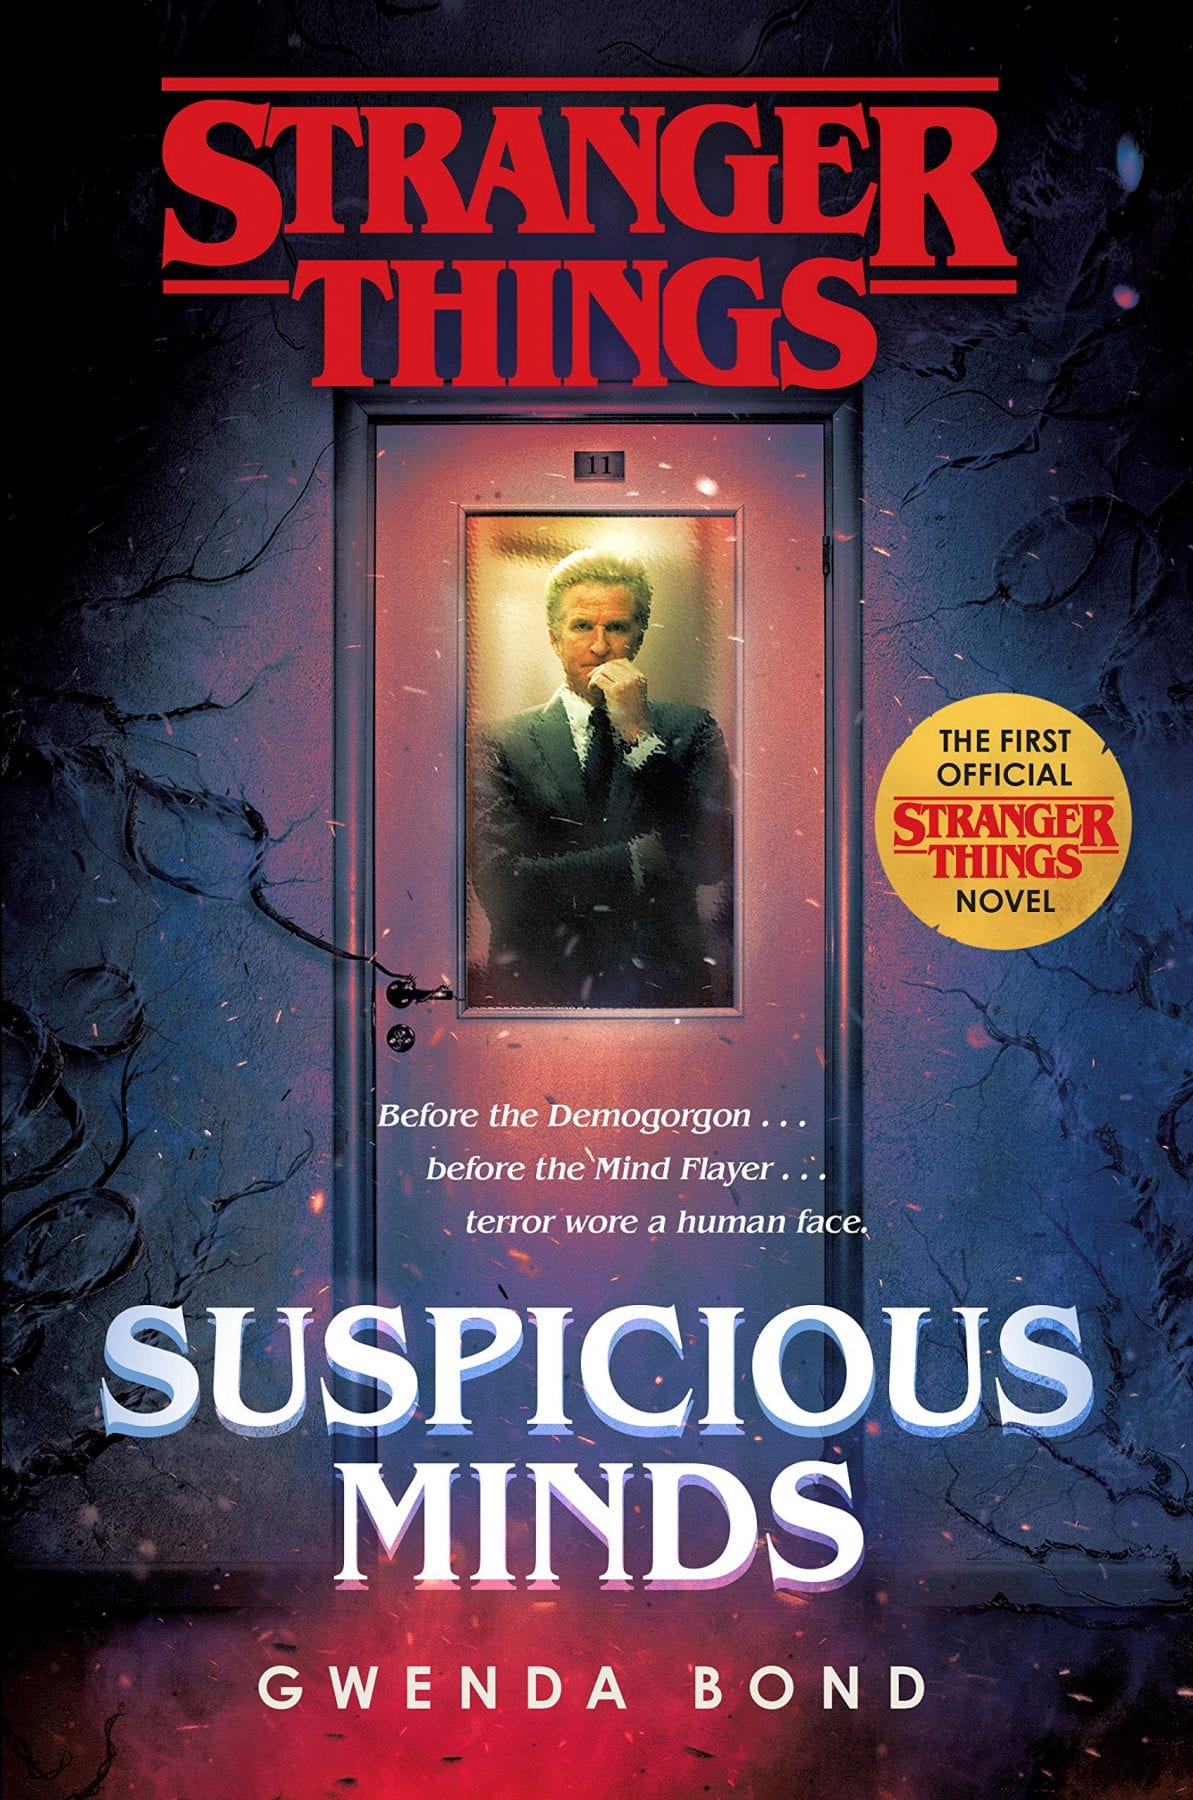 Stranger Things: Suspicious Minds by Gwenda Bond was released in February 2019